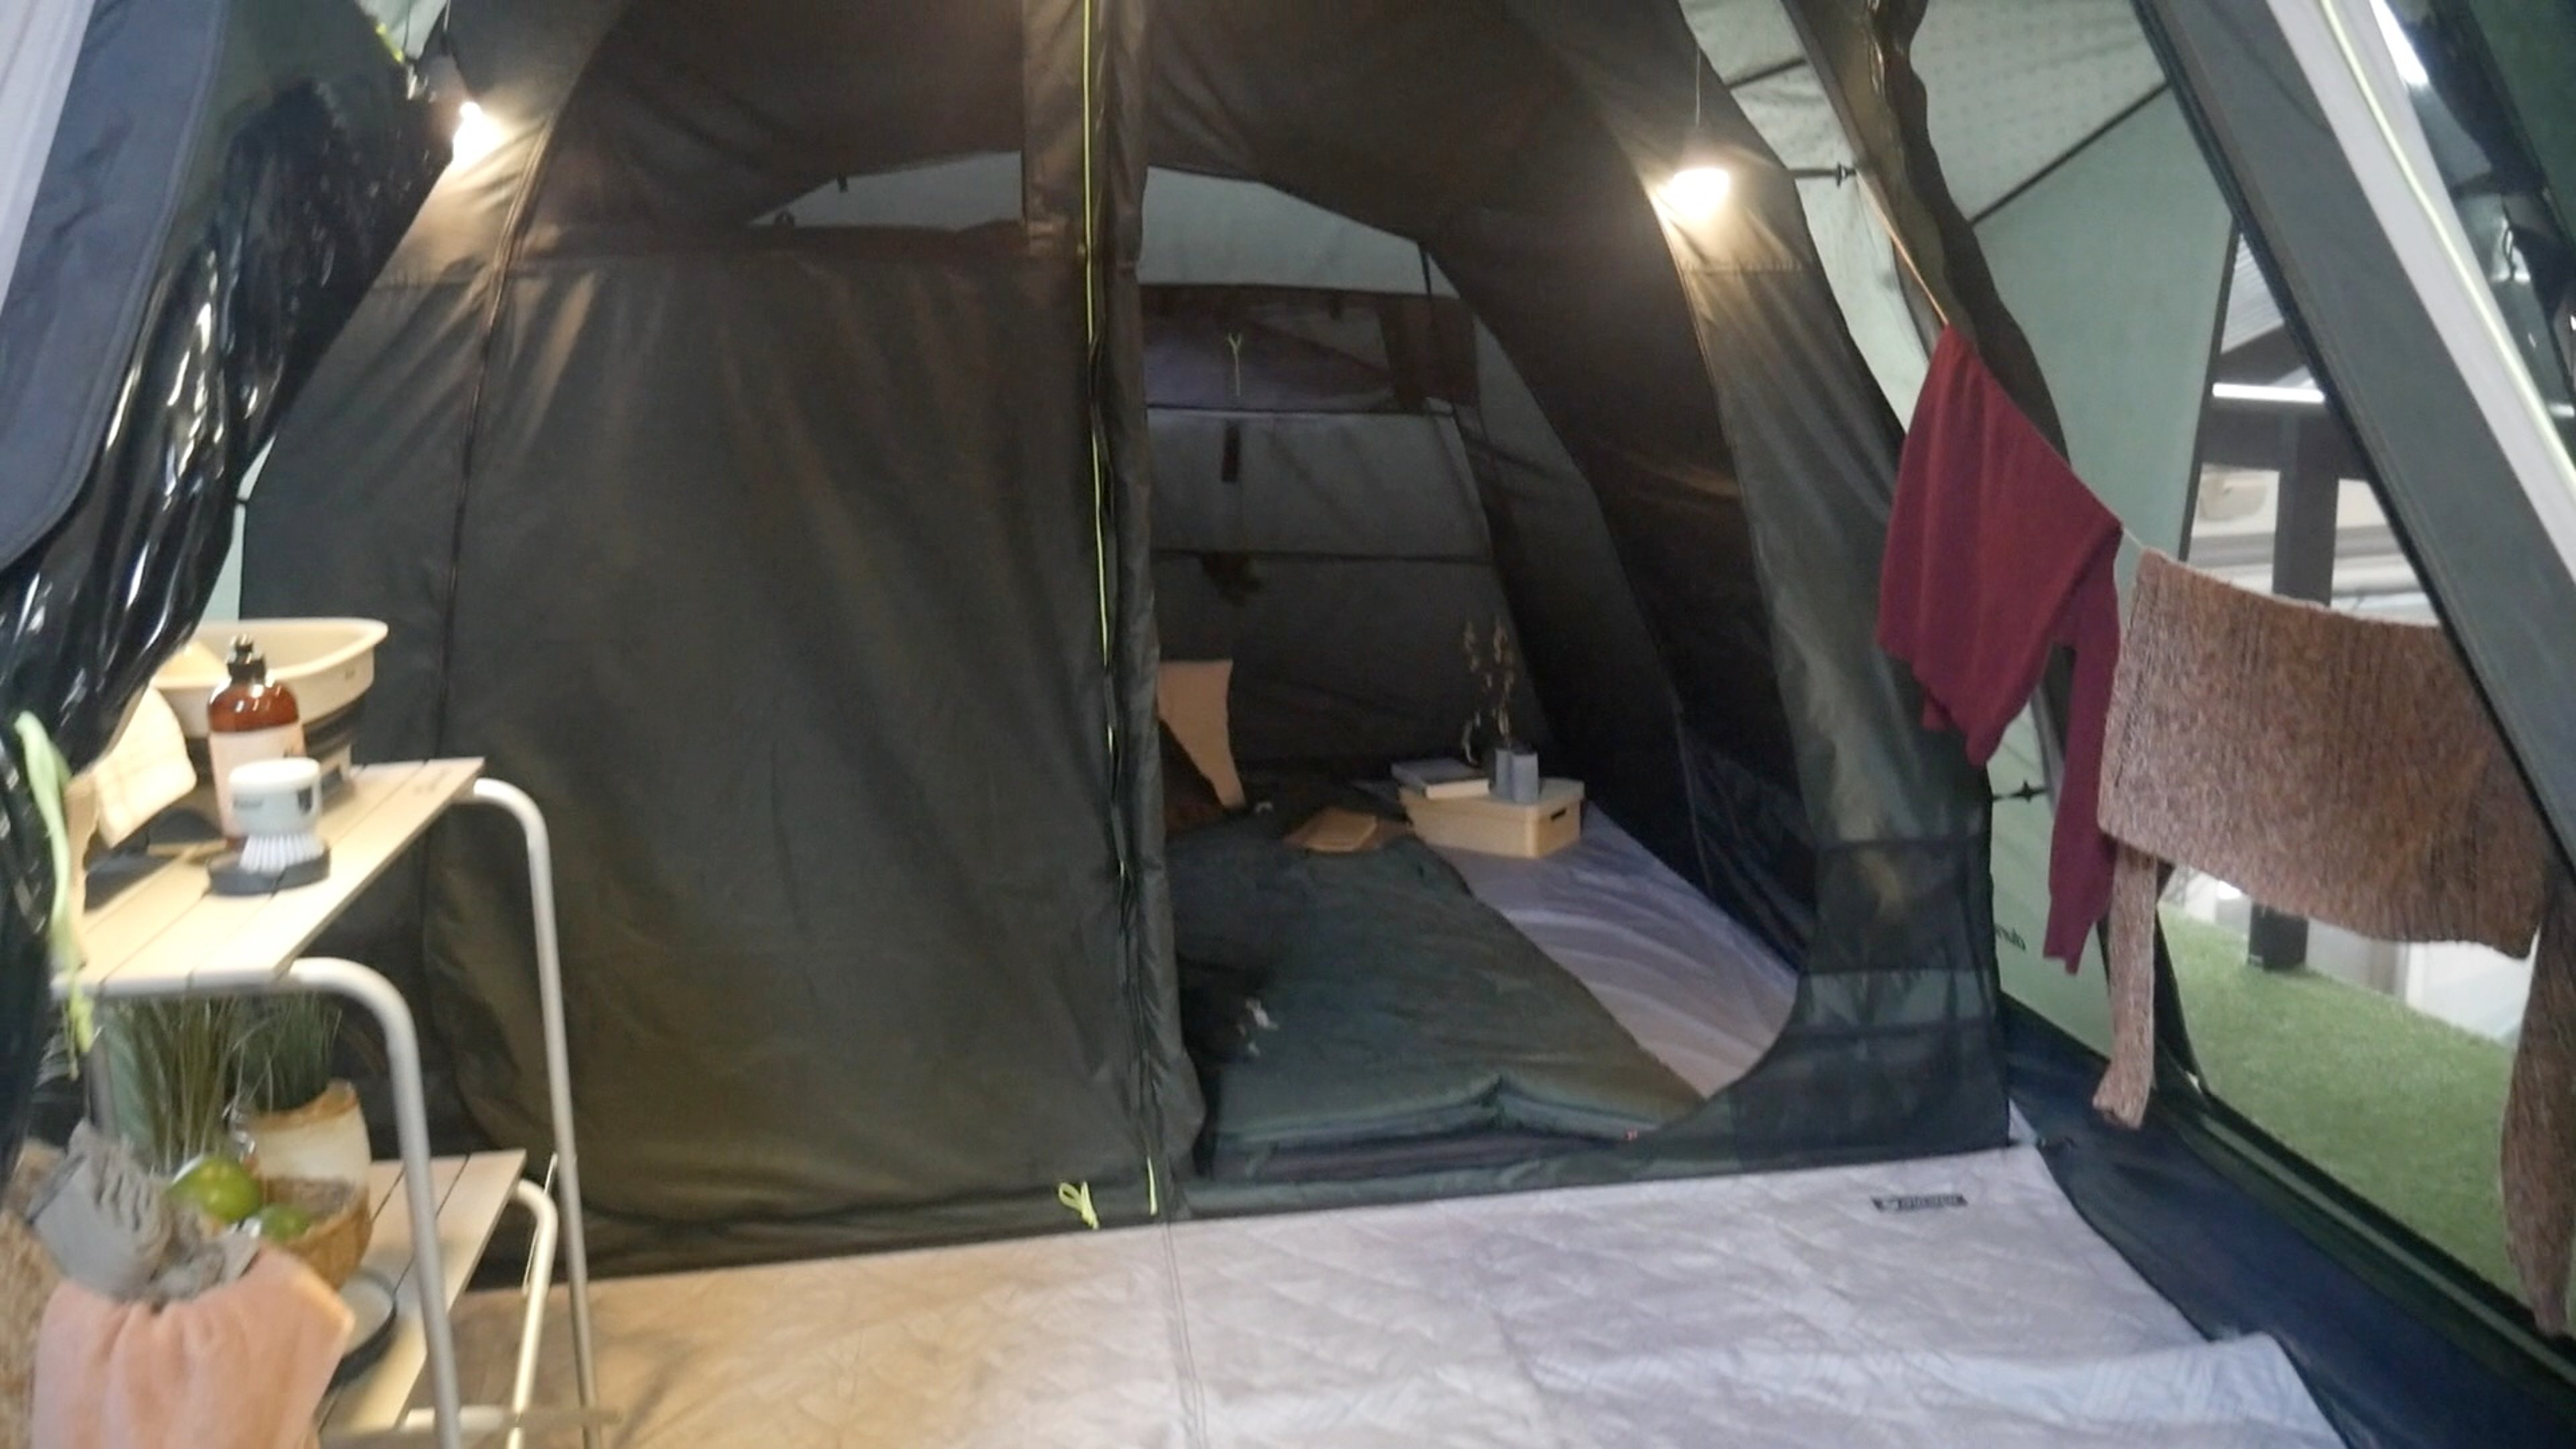 A view of inside the tent